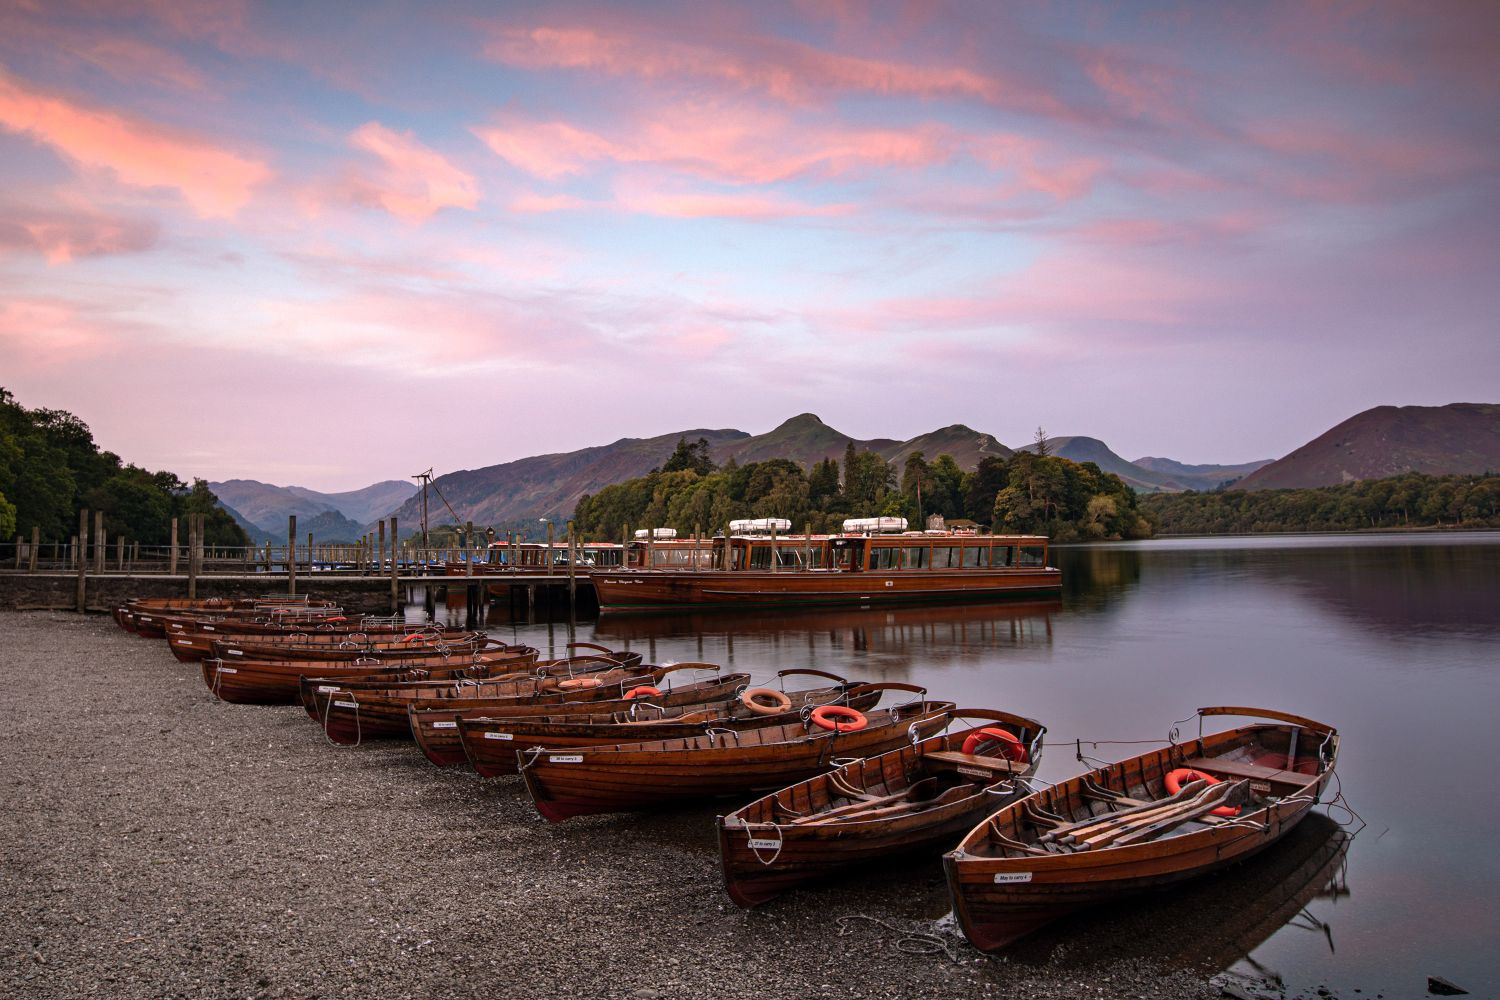 Sunrise over The Keswick Boat Landings by Martin Lawrence Photography